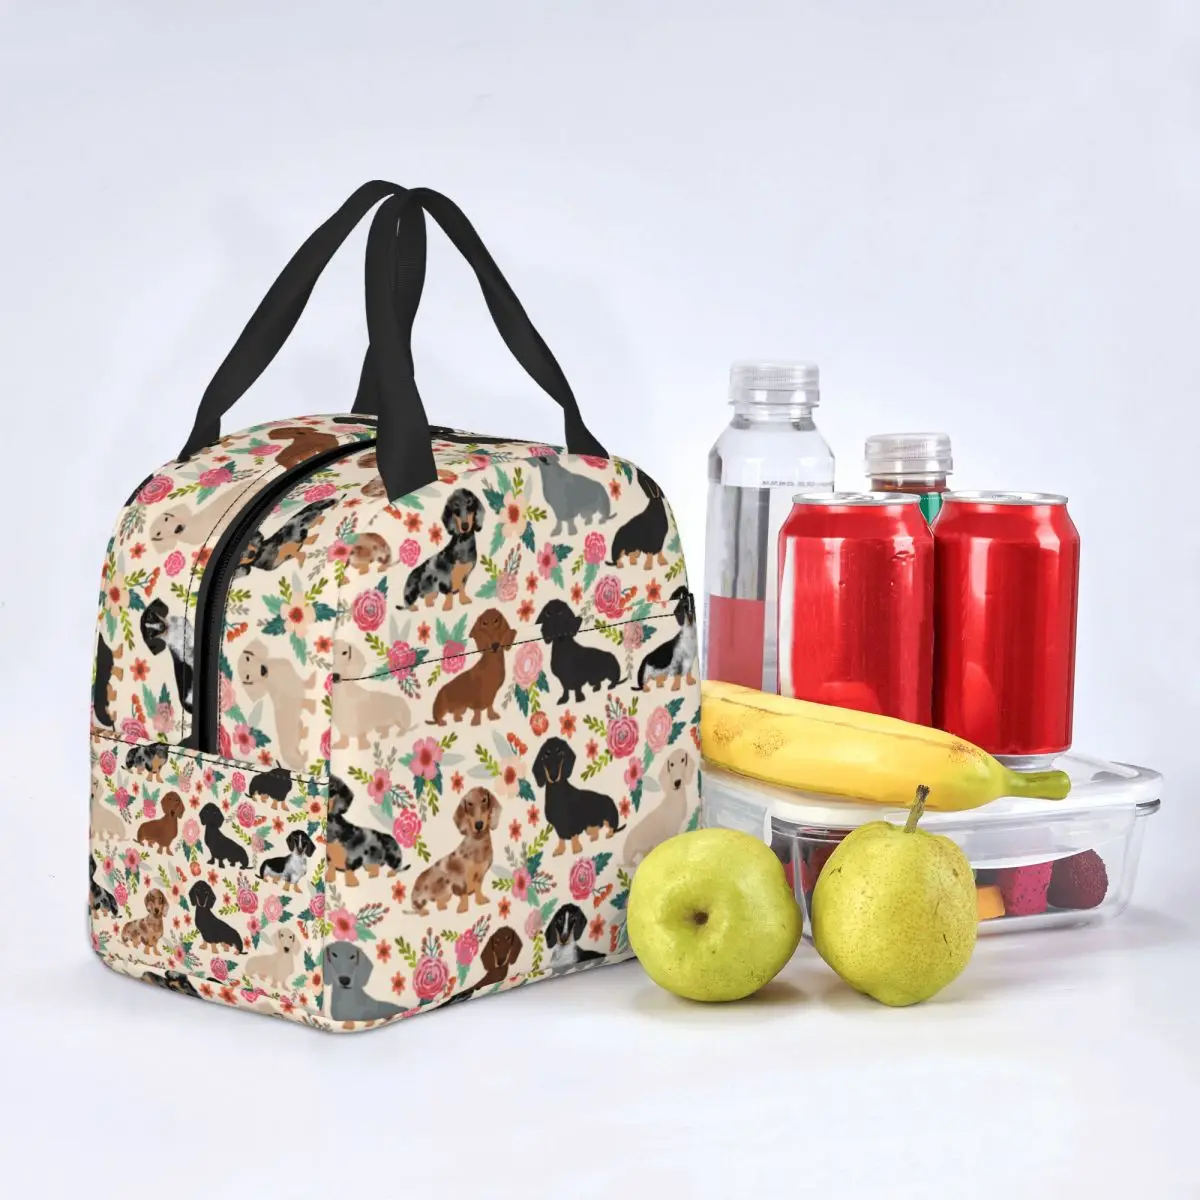 Dachshund Dogs Vintage Florals Lunch Bags Waterproof Insulated Canvas Cooler Bags Thermal Picnic Lunch Box for Women Girl